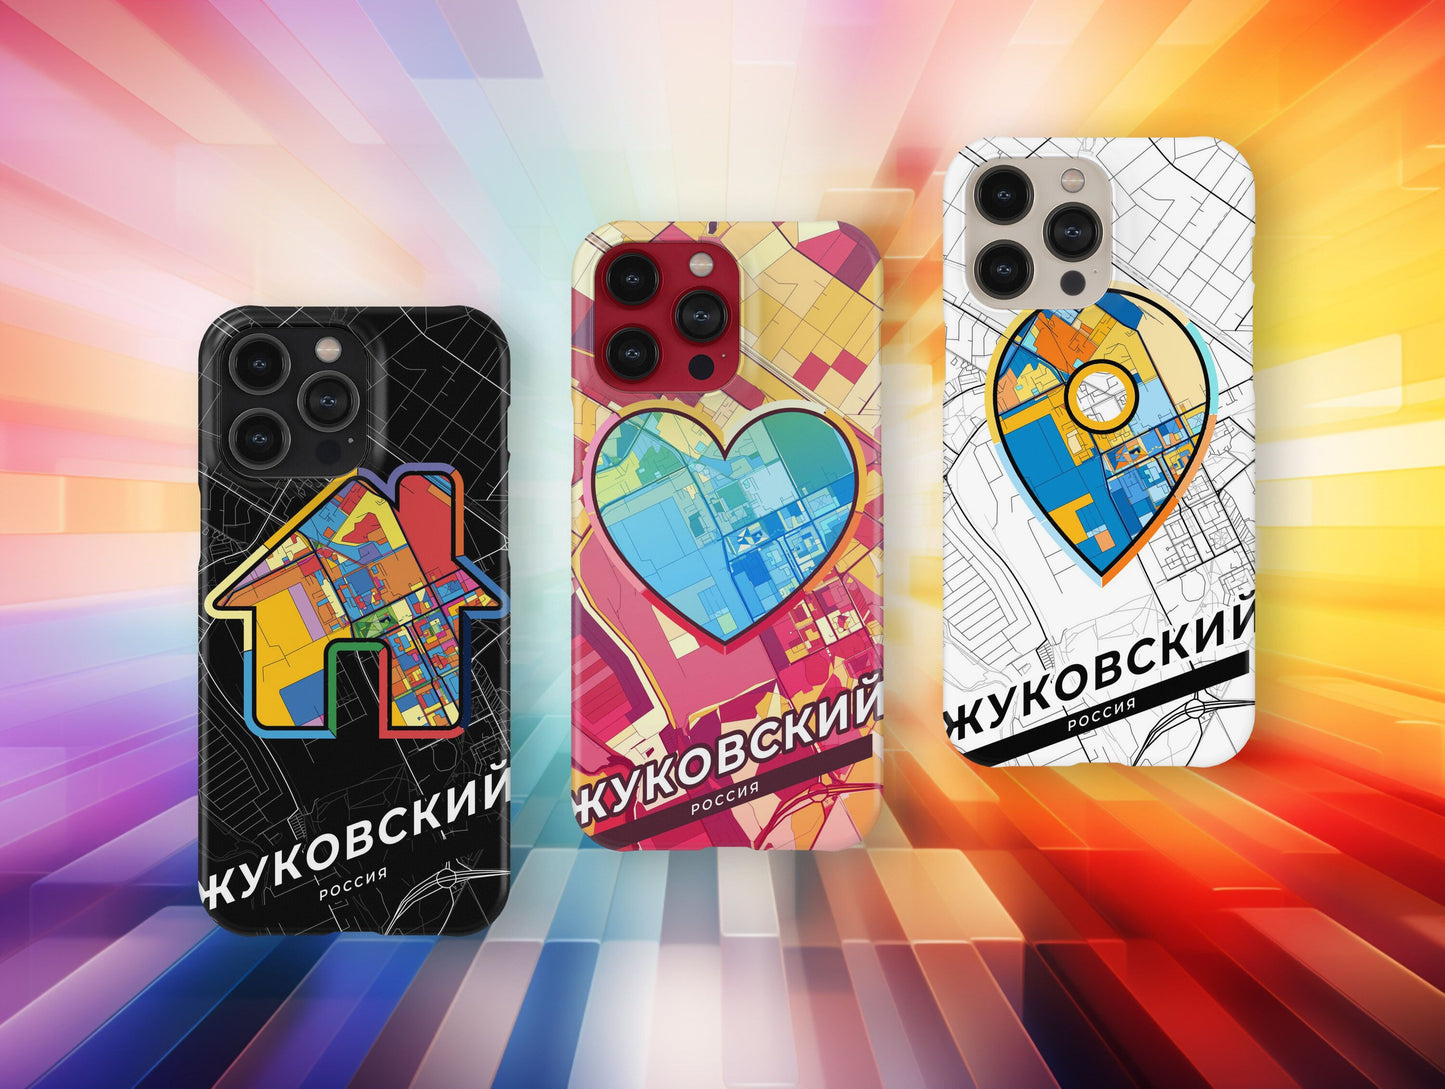 Zhukovsky Russia slim phone case with colorful icon